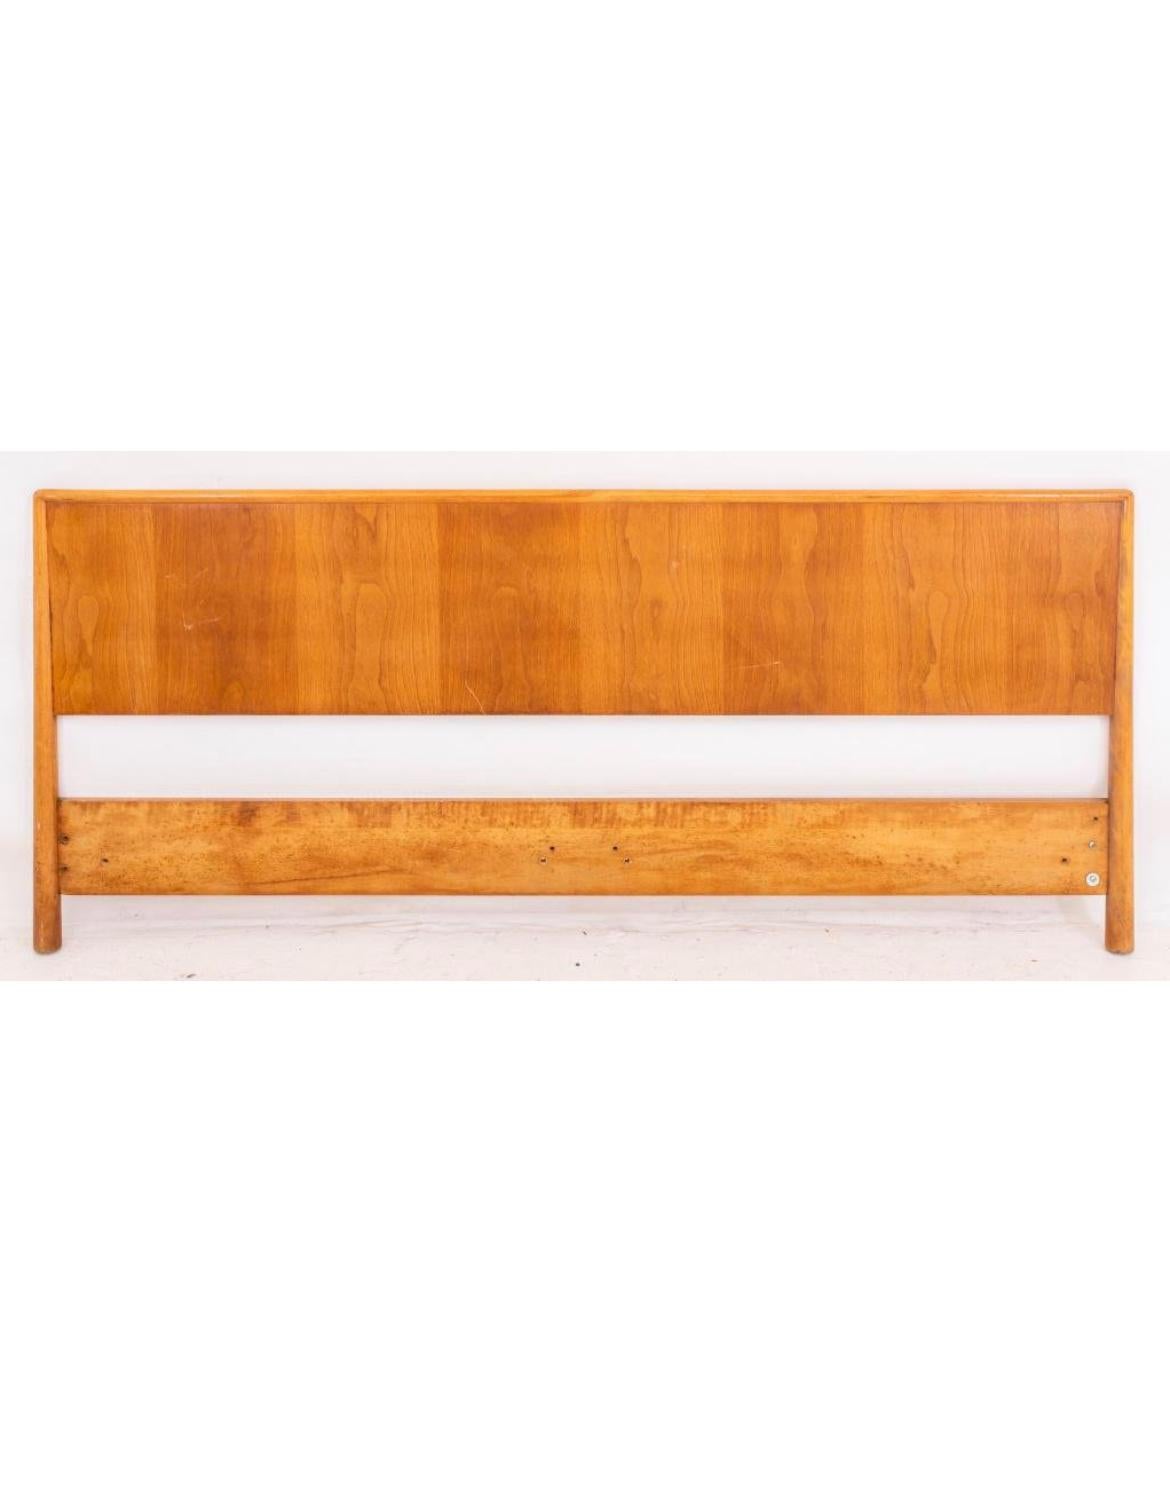 Beautiful Robsjohn-Gibbings for Widdicomb furniture bed headboard in wonderful condition. finely crafted rounded curved blonde maple wood details. Fits a king sized mattress. Bed headboard only no metal bed frame. Easily mounts to all bed